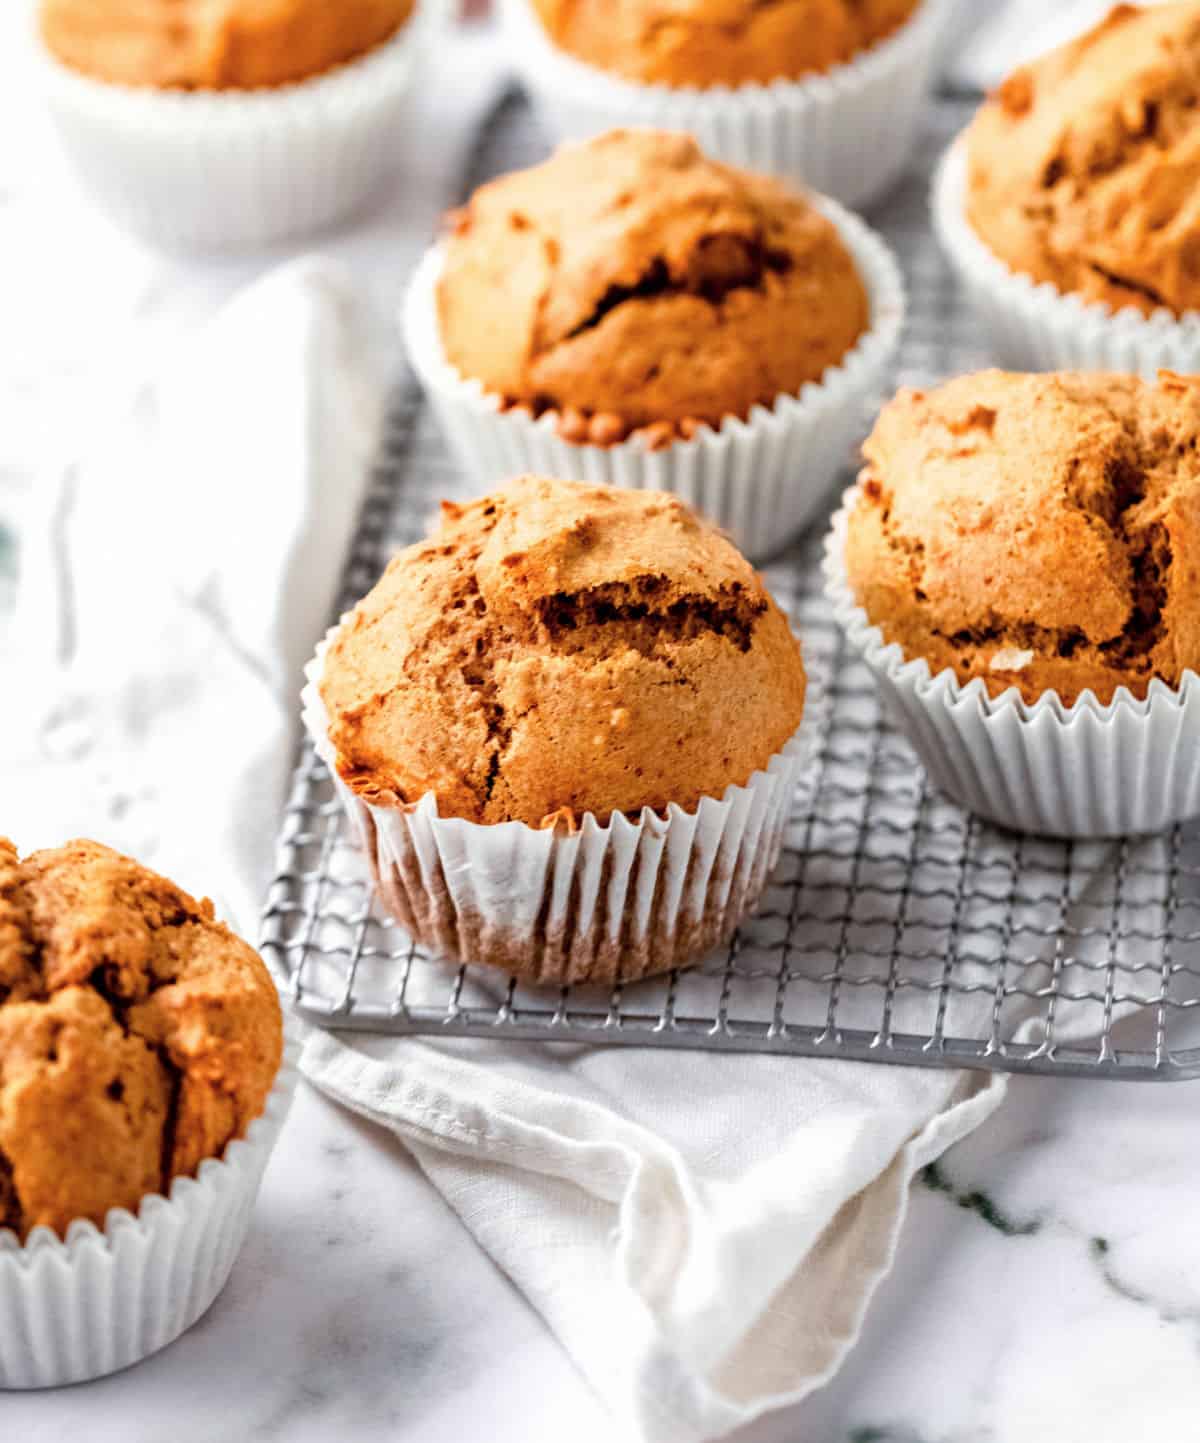 Several pumpkin muffins on a wire rack with a white cloth. White marble surface.